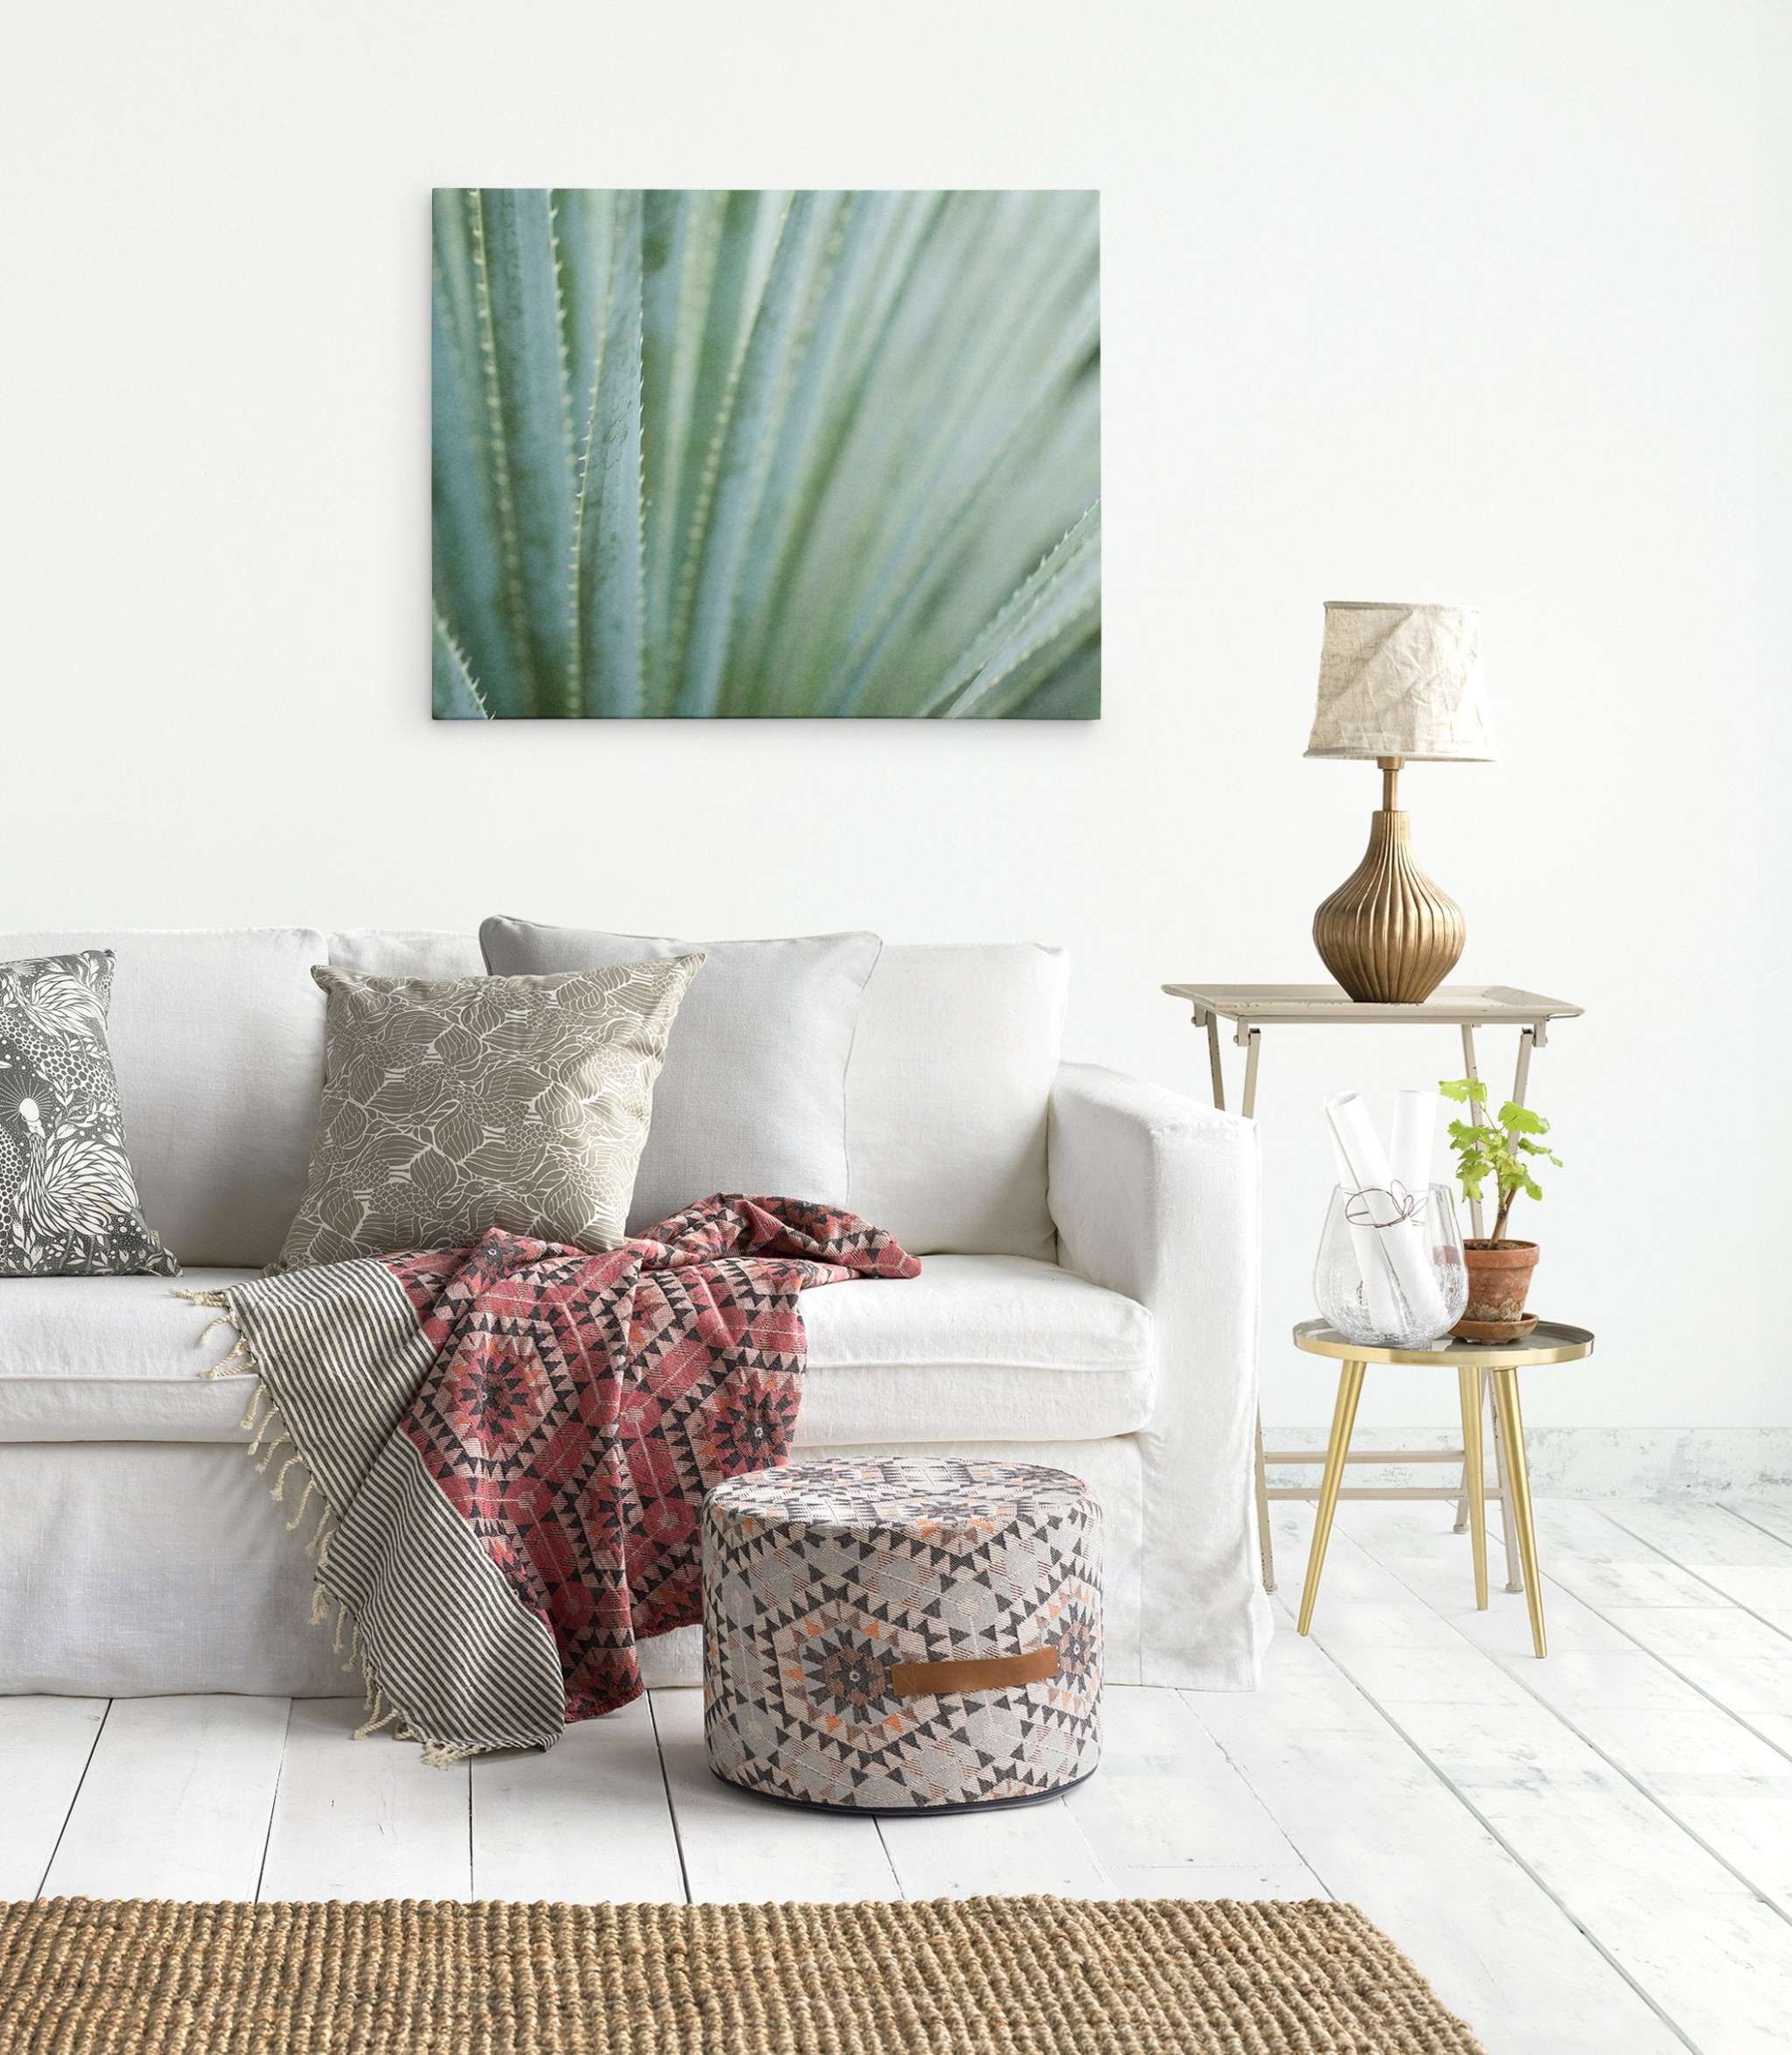 A cozy living room corner with a white sofa adorned with various patterned pillows and a red throw, a small wooden side table with a lamp, and an Offley Green 'Strands and Spikes' Abstract Green Botanical Canvas Wall Art on the wall.